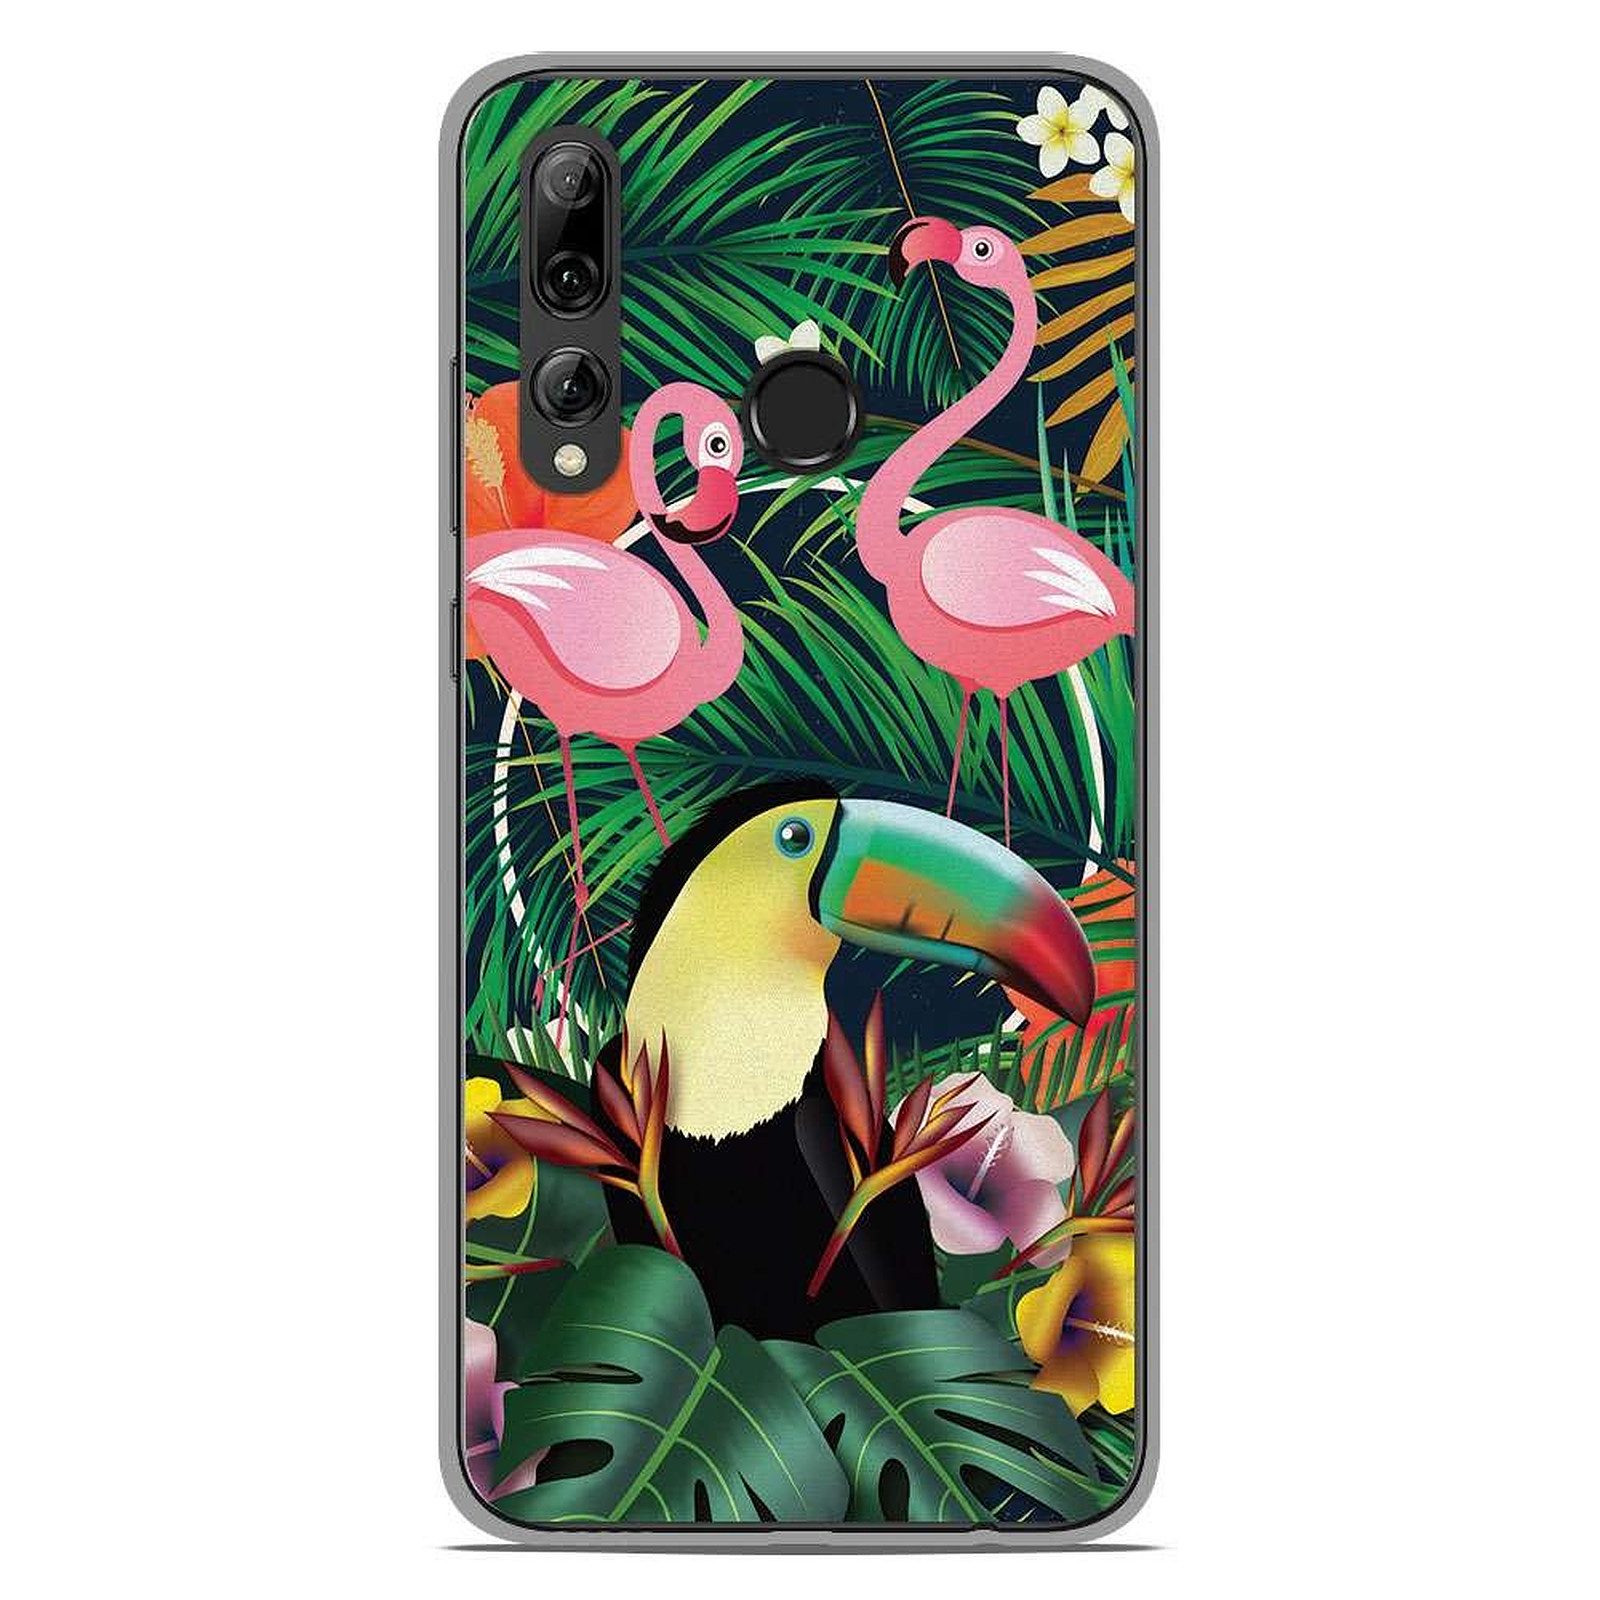 1001 Coques Coque silicone gel Huawei P Smart Plus 2019 motif Tropical Toucan - Coque telephone 1001Coques